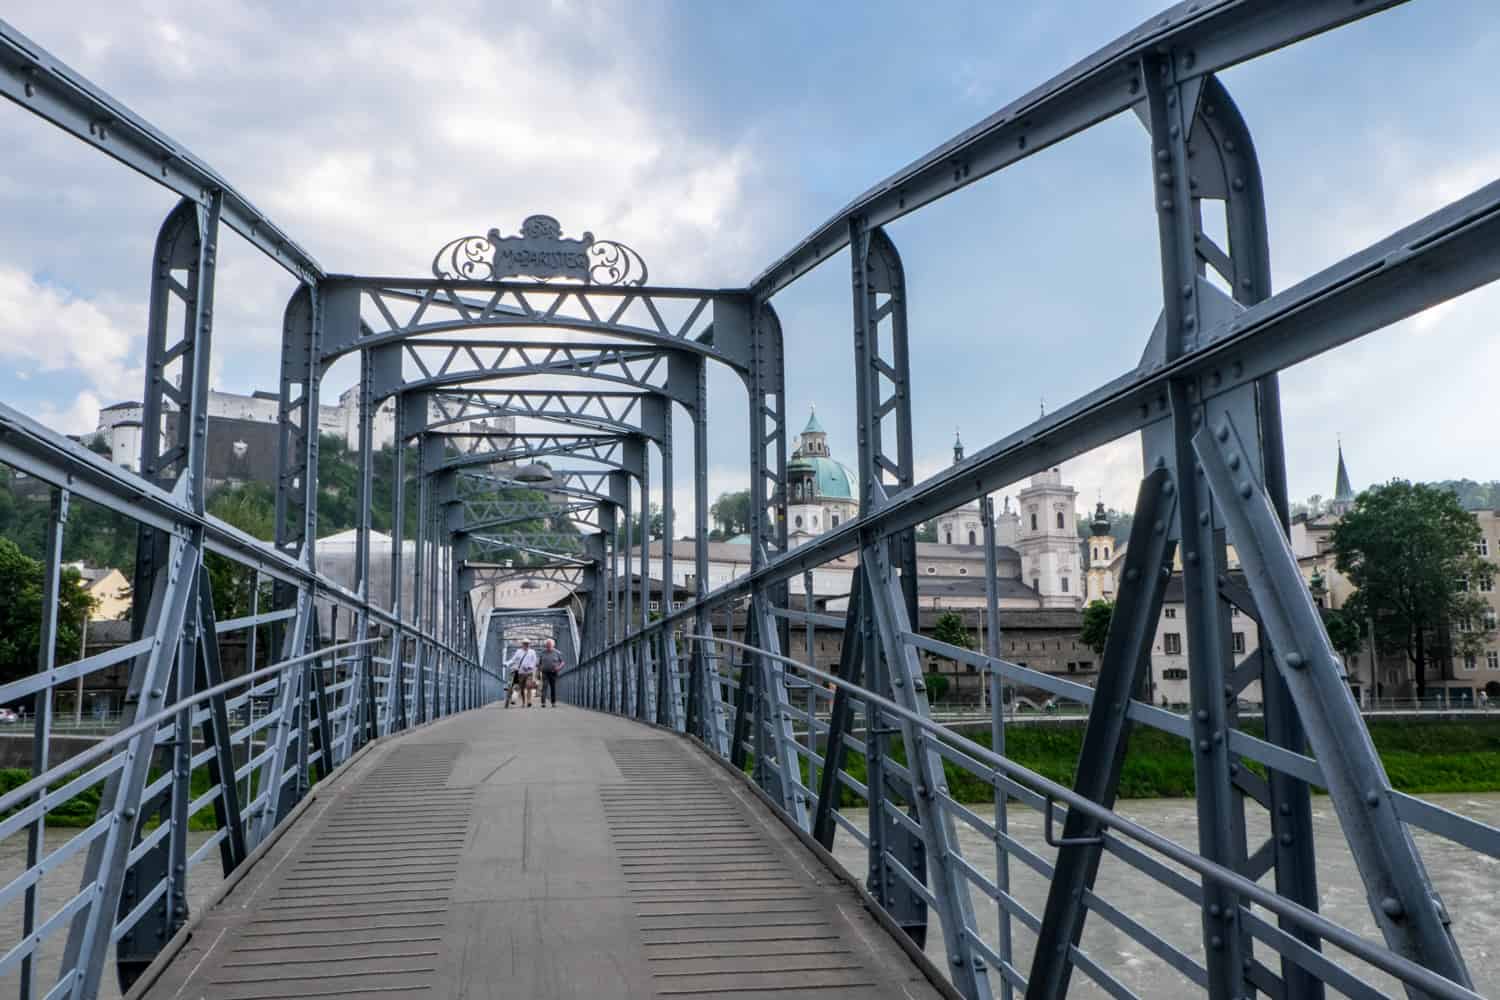 The dark metal poles, handrails and archways of a bridge in Salzburg made famous in the Sound of Music.